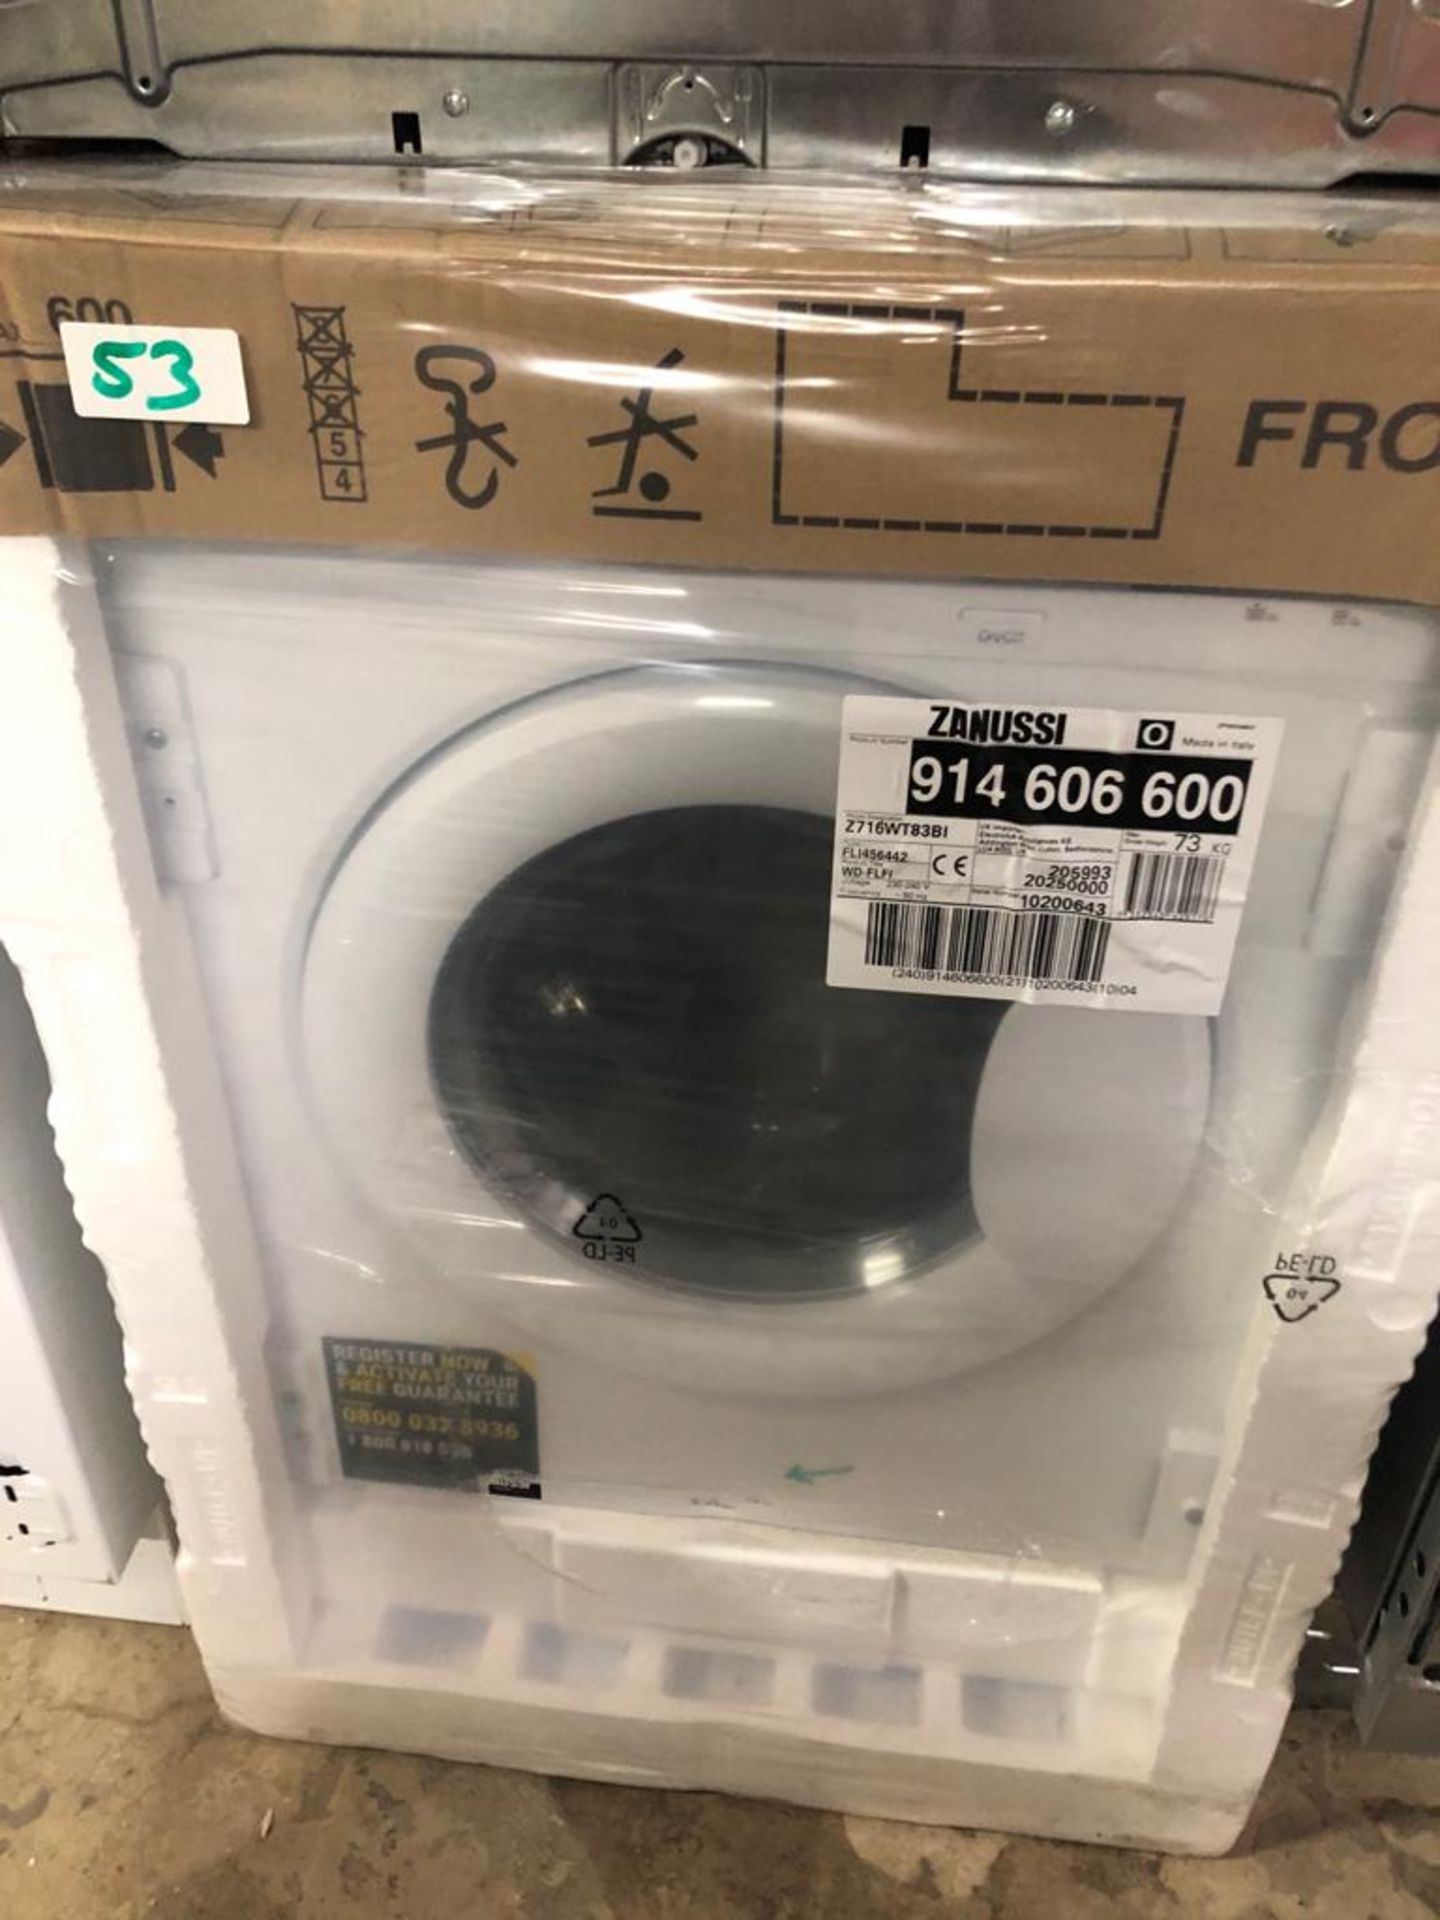 NEW/GRADED AND PACKAGED Zanussi Z716WT83BI Integrated Washer Dryer, 7kg/4kg Load (Scratches on the